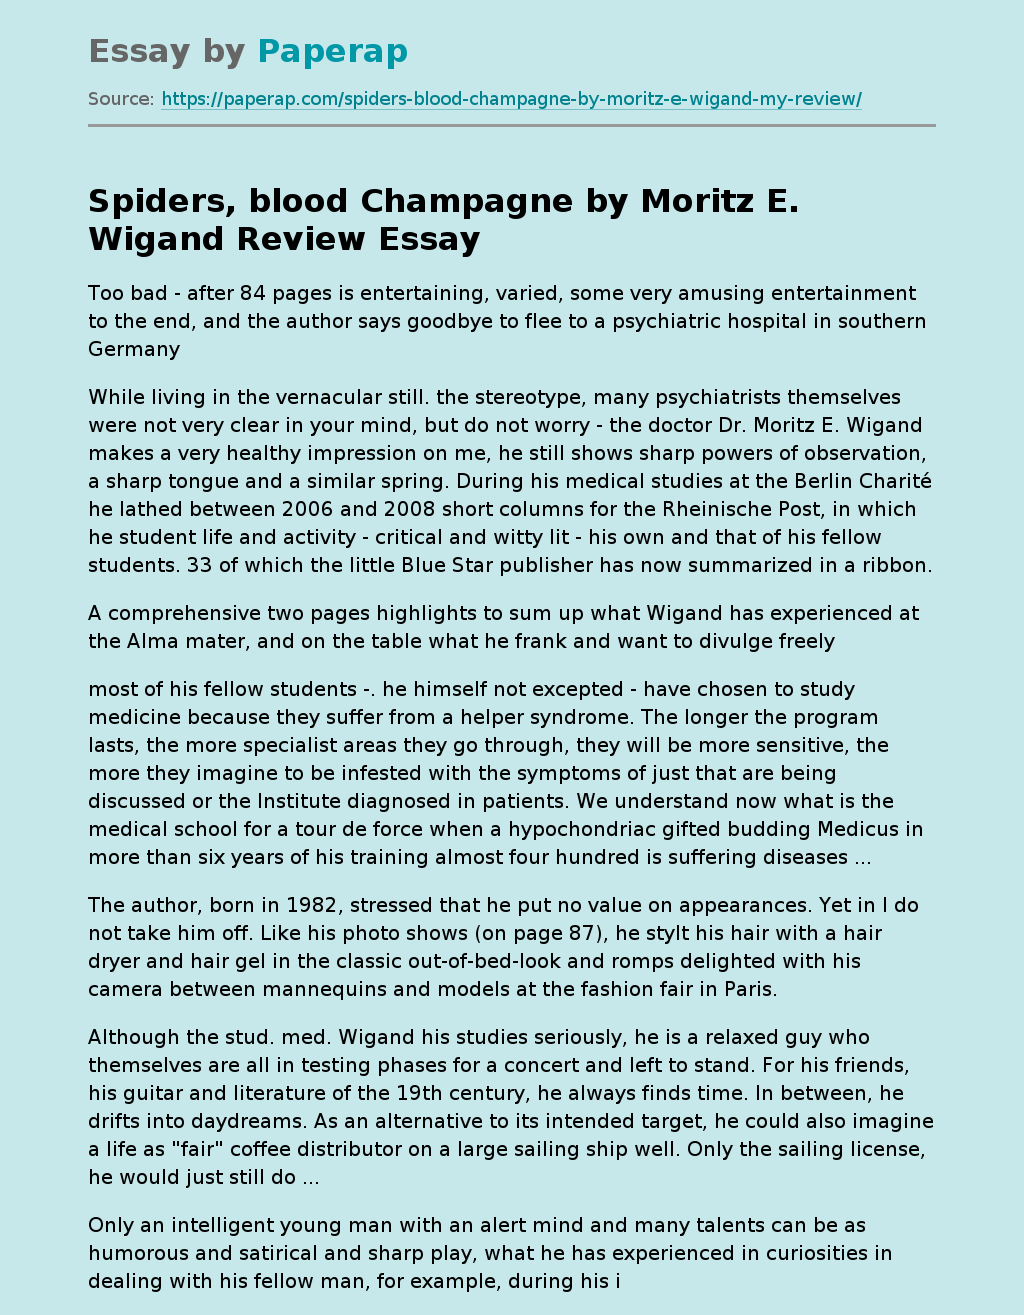 "Spiders, blood Champagne" by Moritz E. Wigand